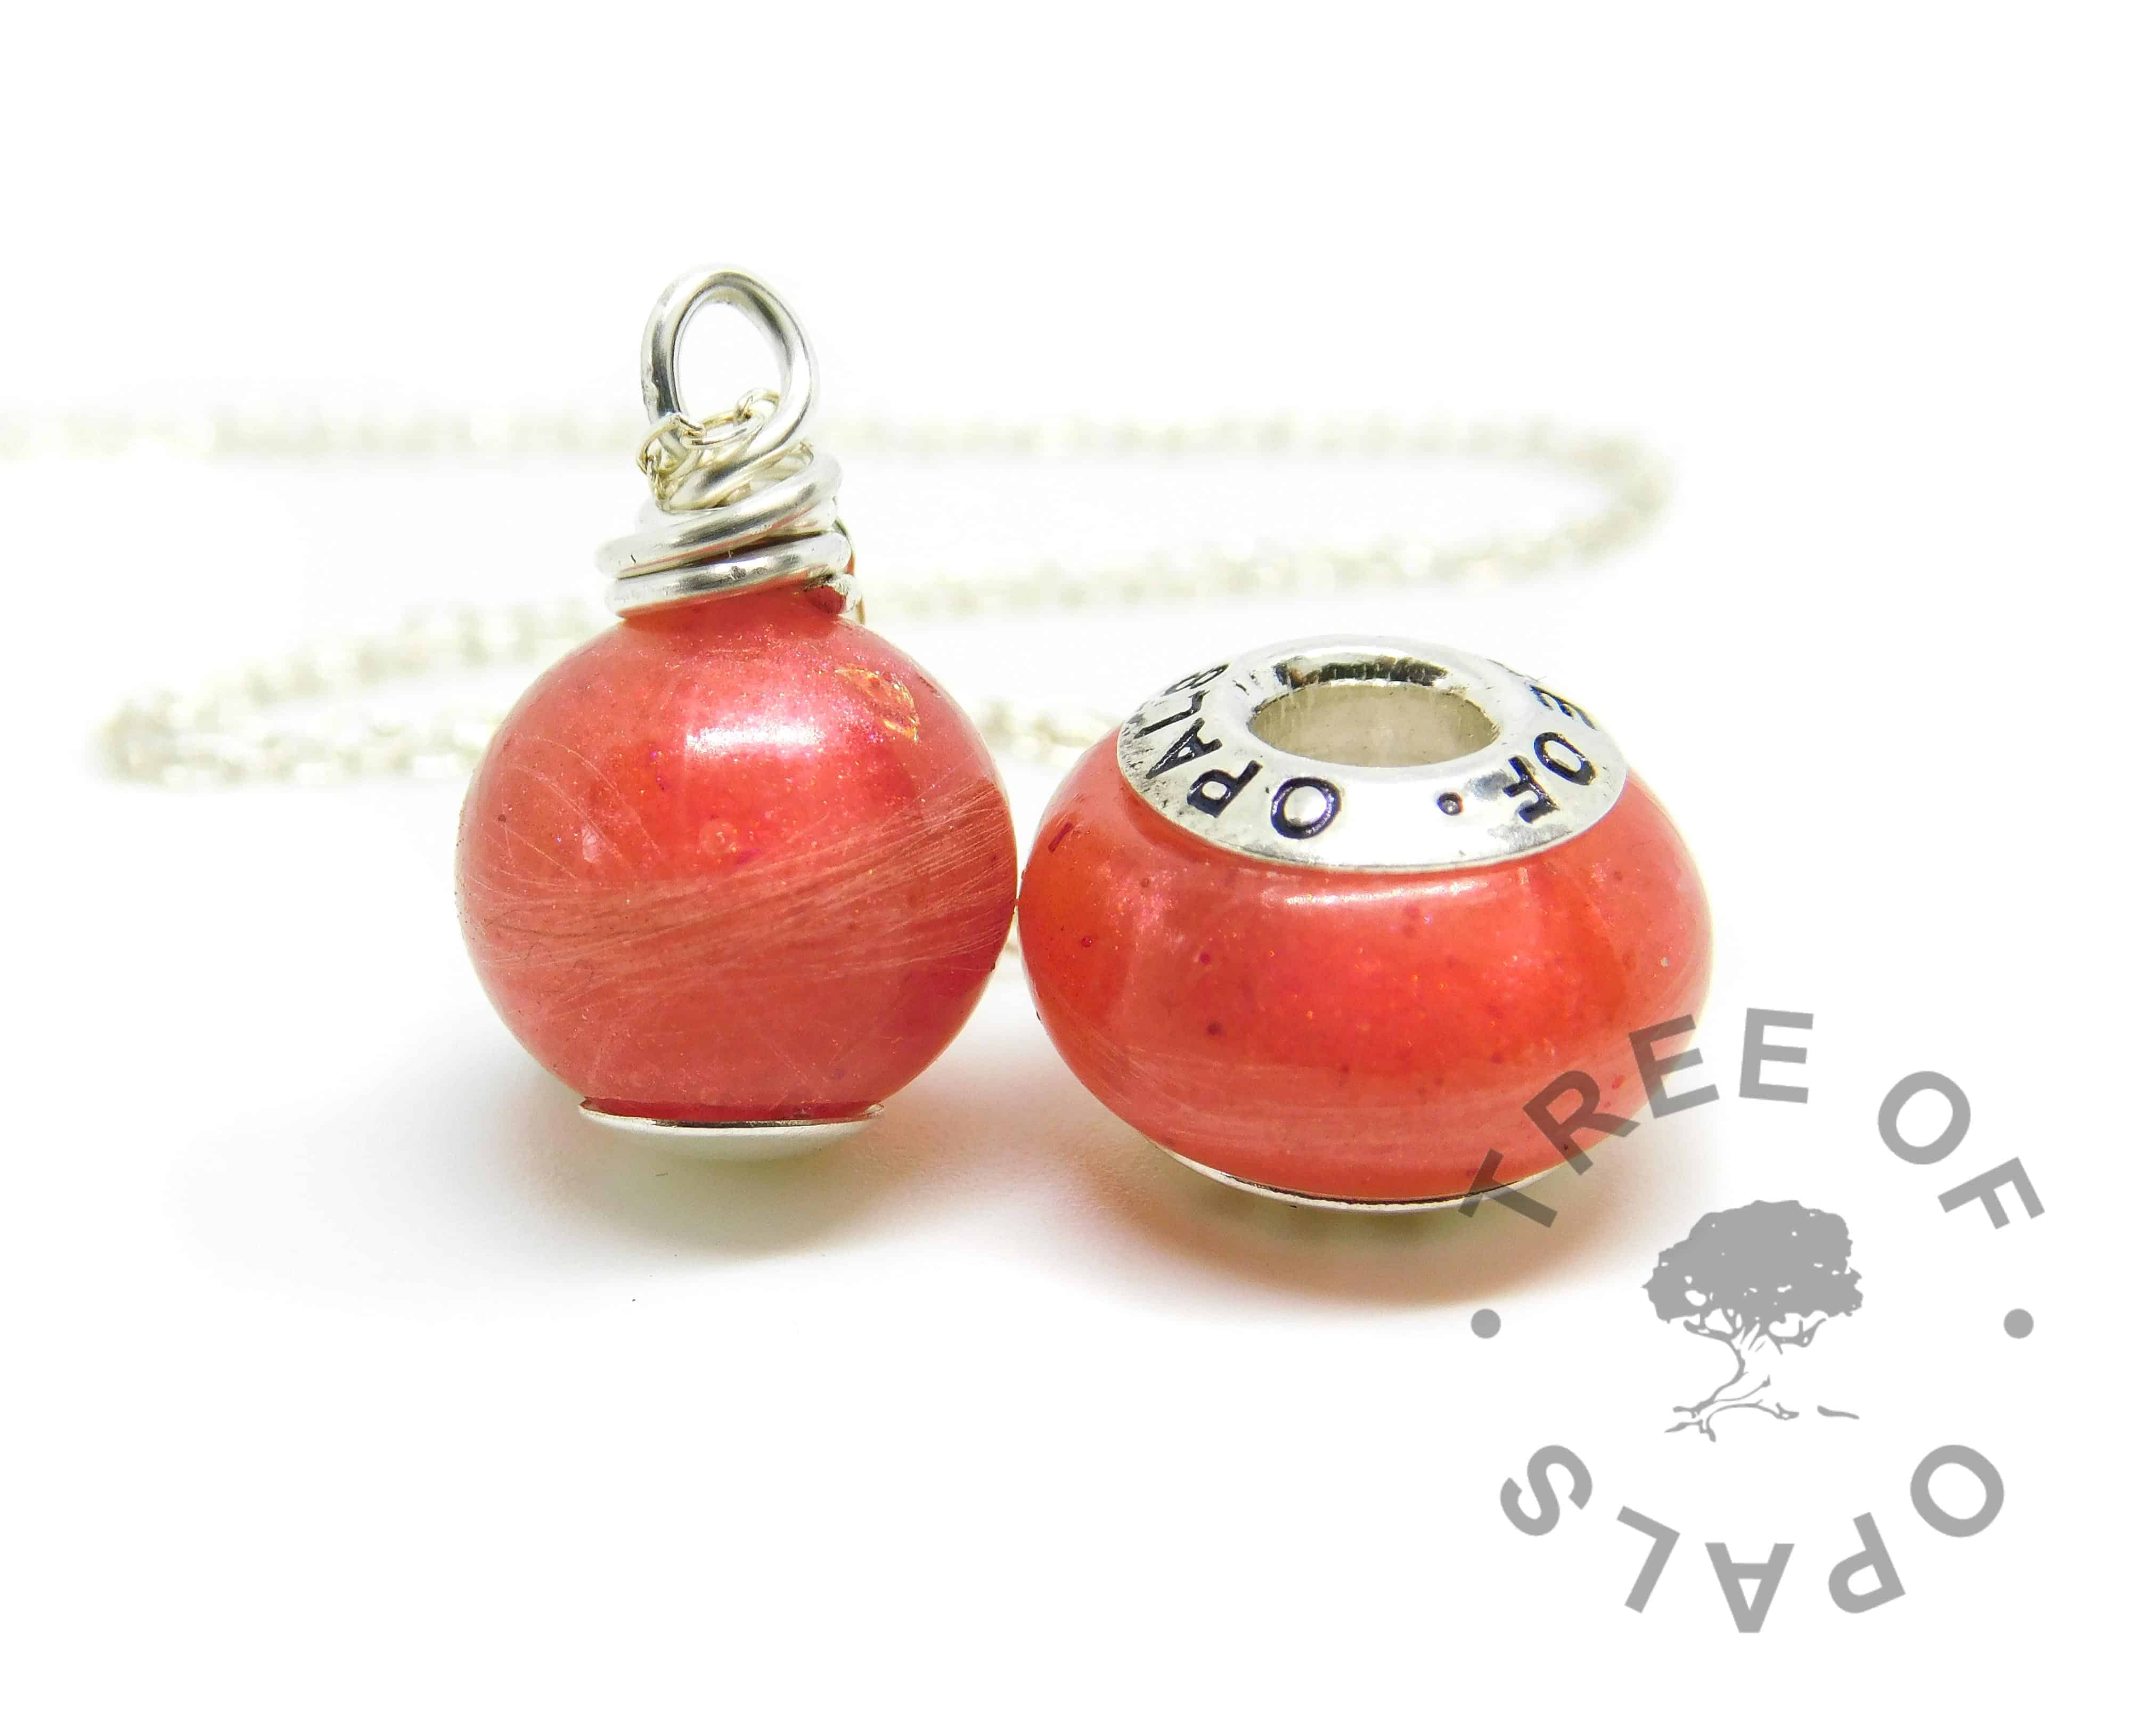 Lock of hair pearl and charm. Naturally white or very light blonde hair with dragon's blood red resin sparkle mix, no birthstones. Pearl set with solid sterling handmade headpin and shown with the standard necklace chain, charm set with Tree of Opals core. Watermarked copyright image by Tree of Opals